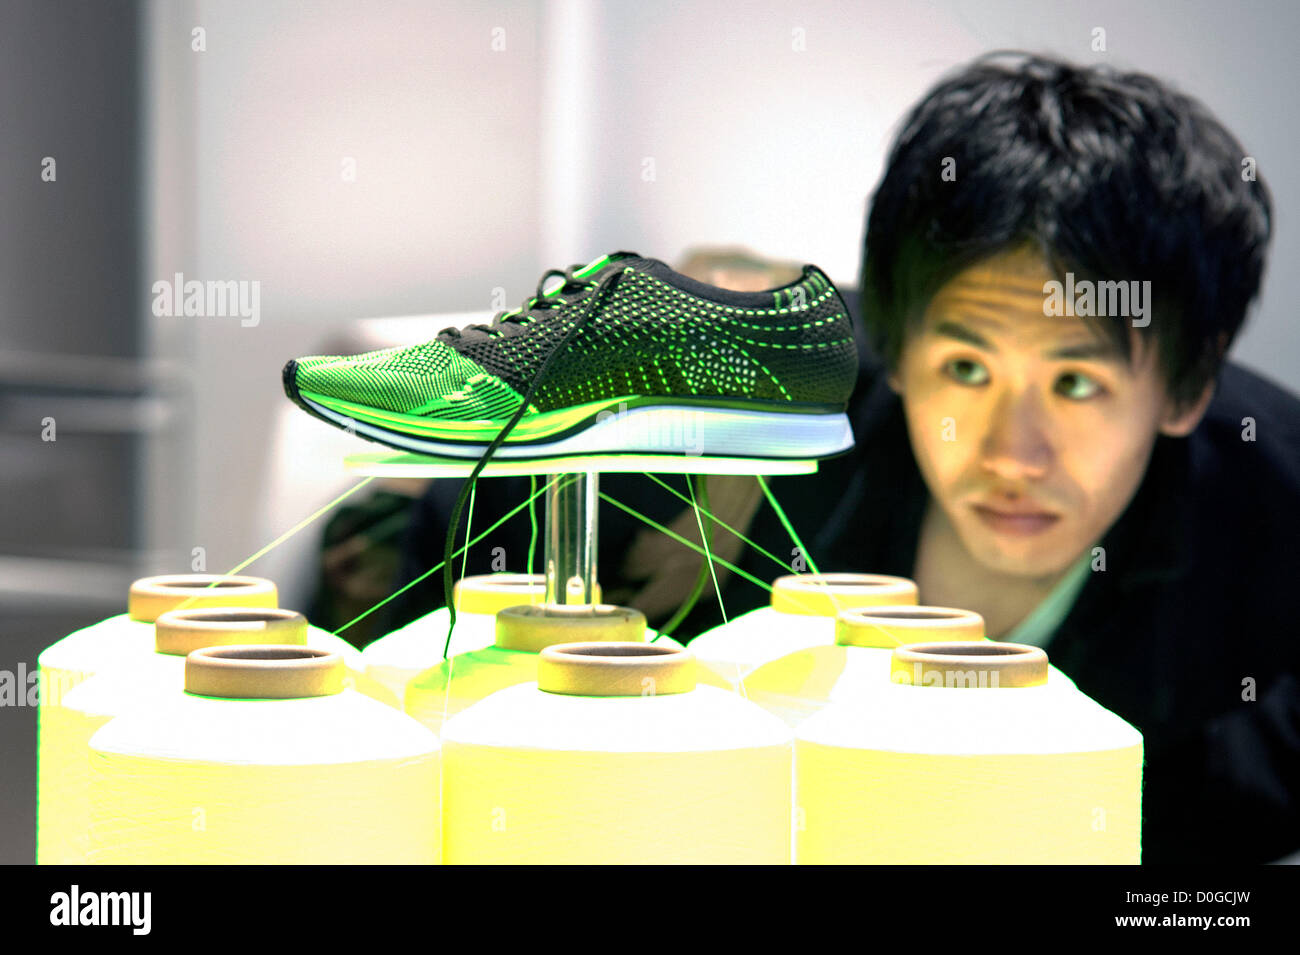 November 25, 2012, Tokyo, Japan - A men sees the running shoe Nike Flyknit  Racer by Nike, Inc. Good Design Award 2012 displays 1,180 good designs  selected products of architecture, communication media